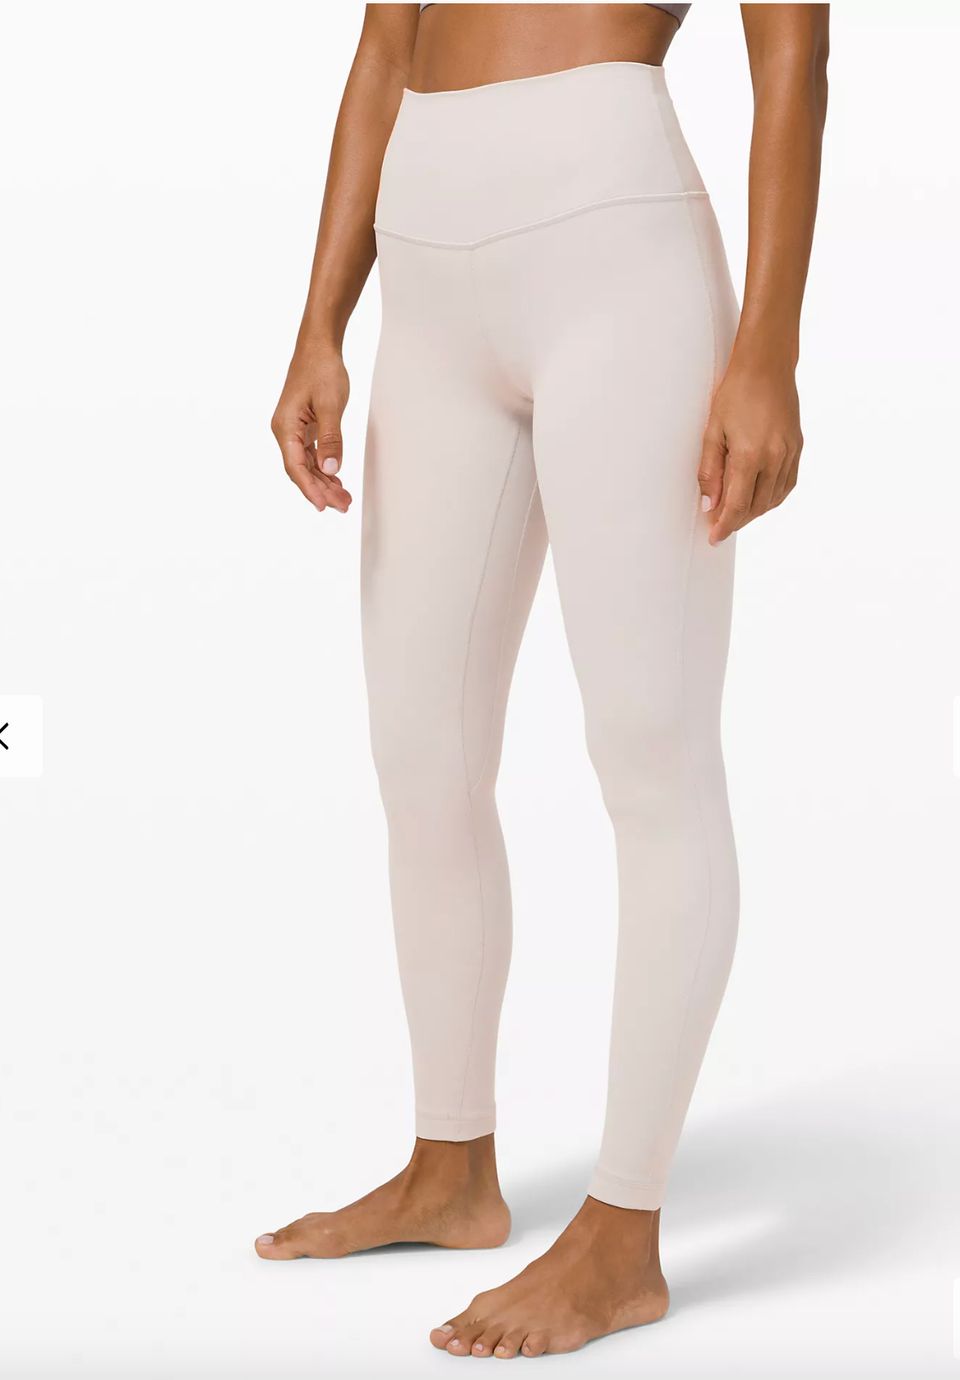 Can You Exchange Lululemon Leggings If They Pill Identifier